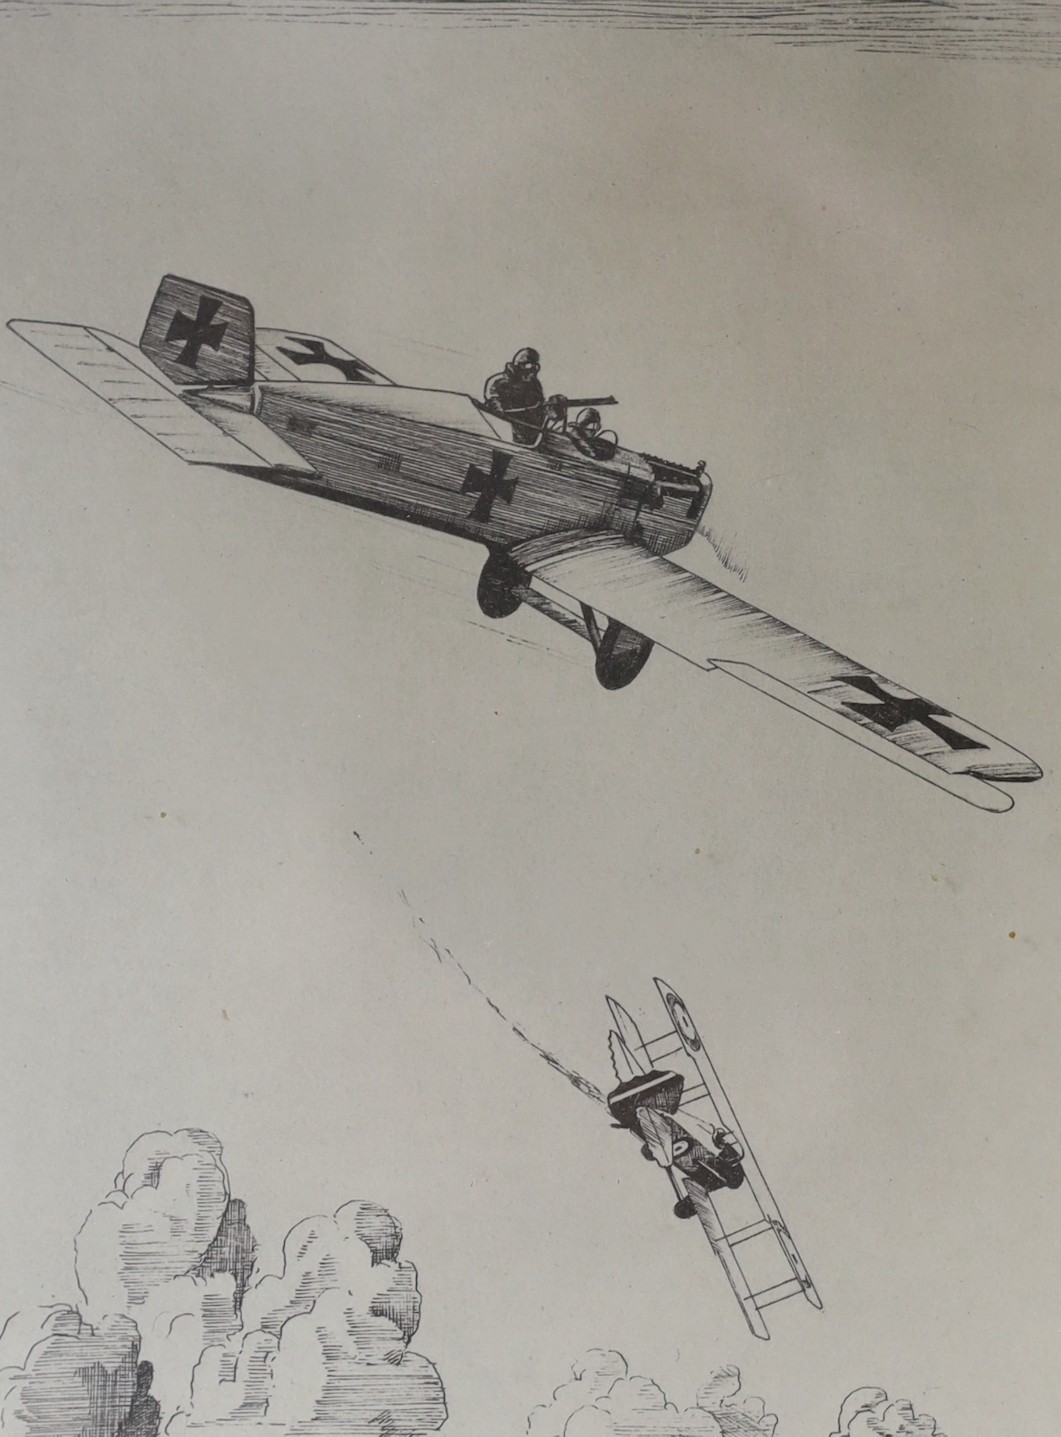 Howard Leigh (1909-1942), three etchings, 'Junker monoplane', 'Pfalz D XII' and 'Gloster Gauntlets', two signed in pencil, one in the plate, largest 13x 10cm